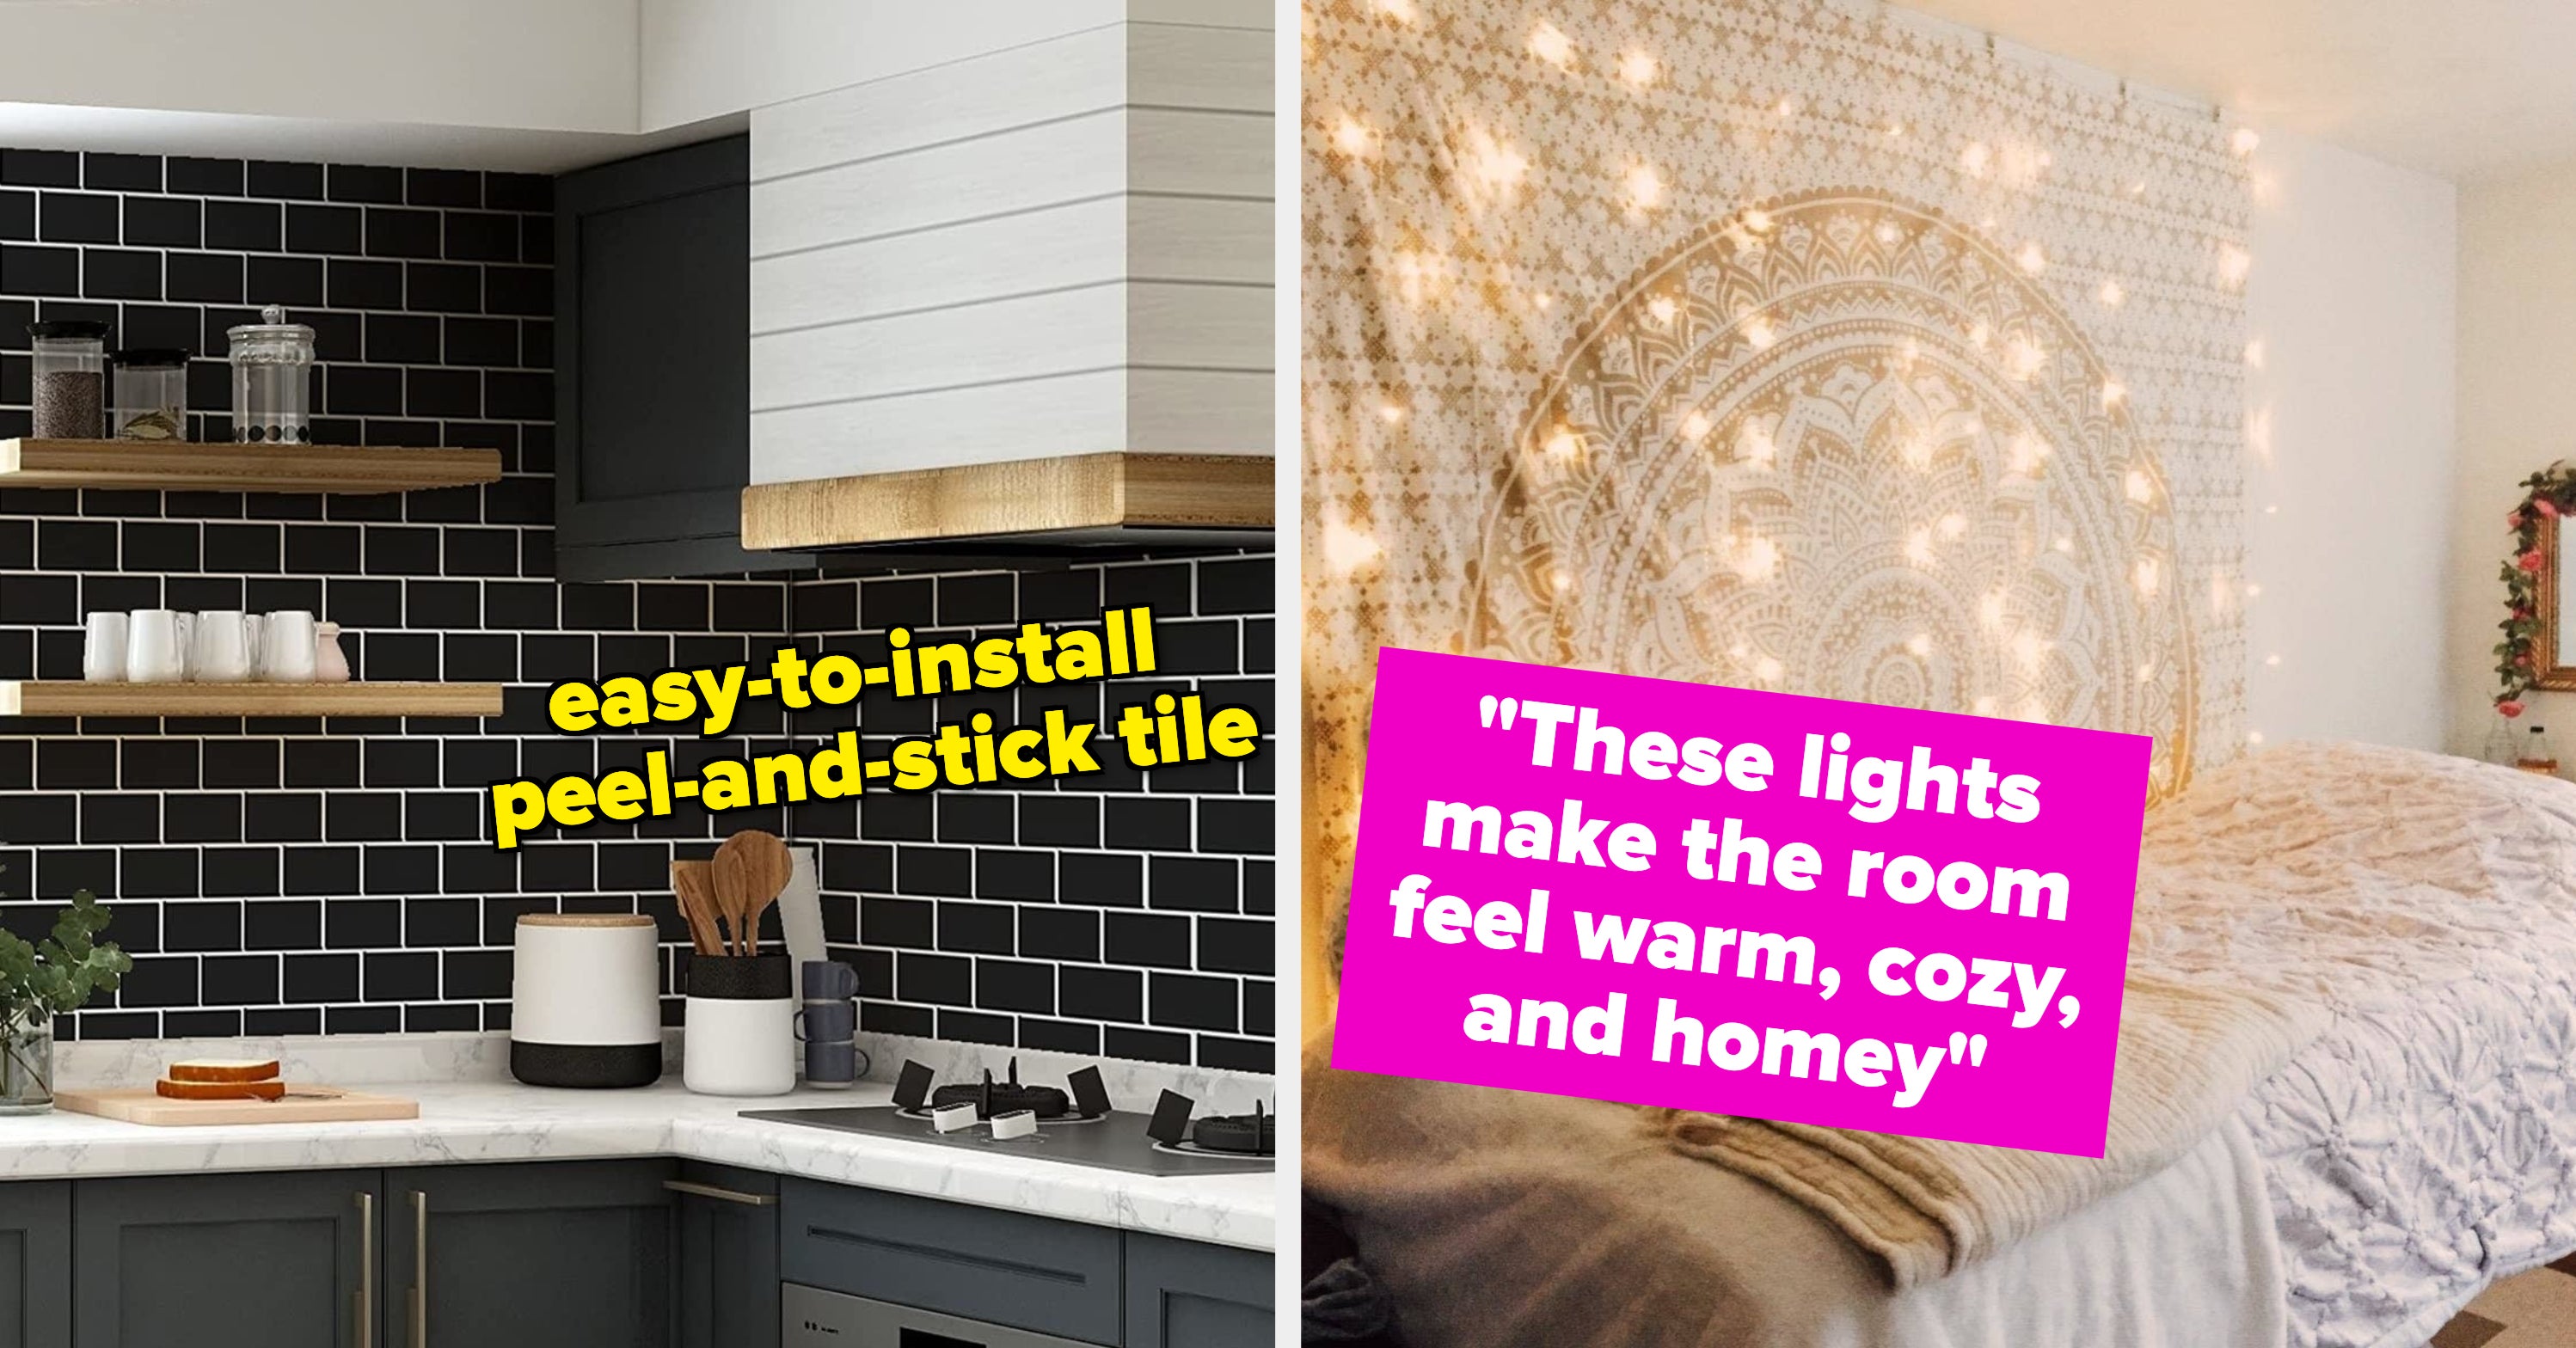 27 Gadgets Under $30 For Every Room In Your House